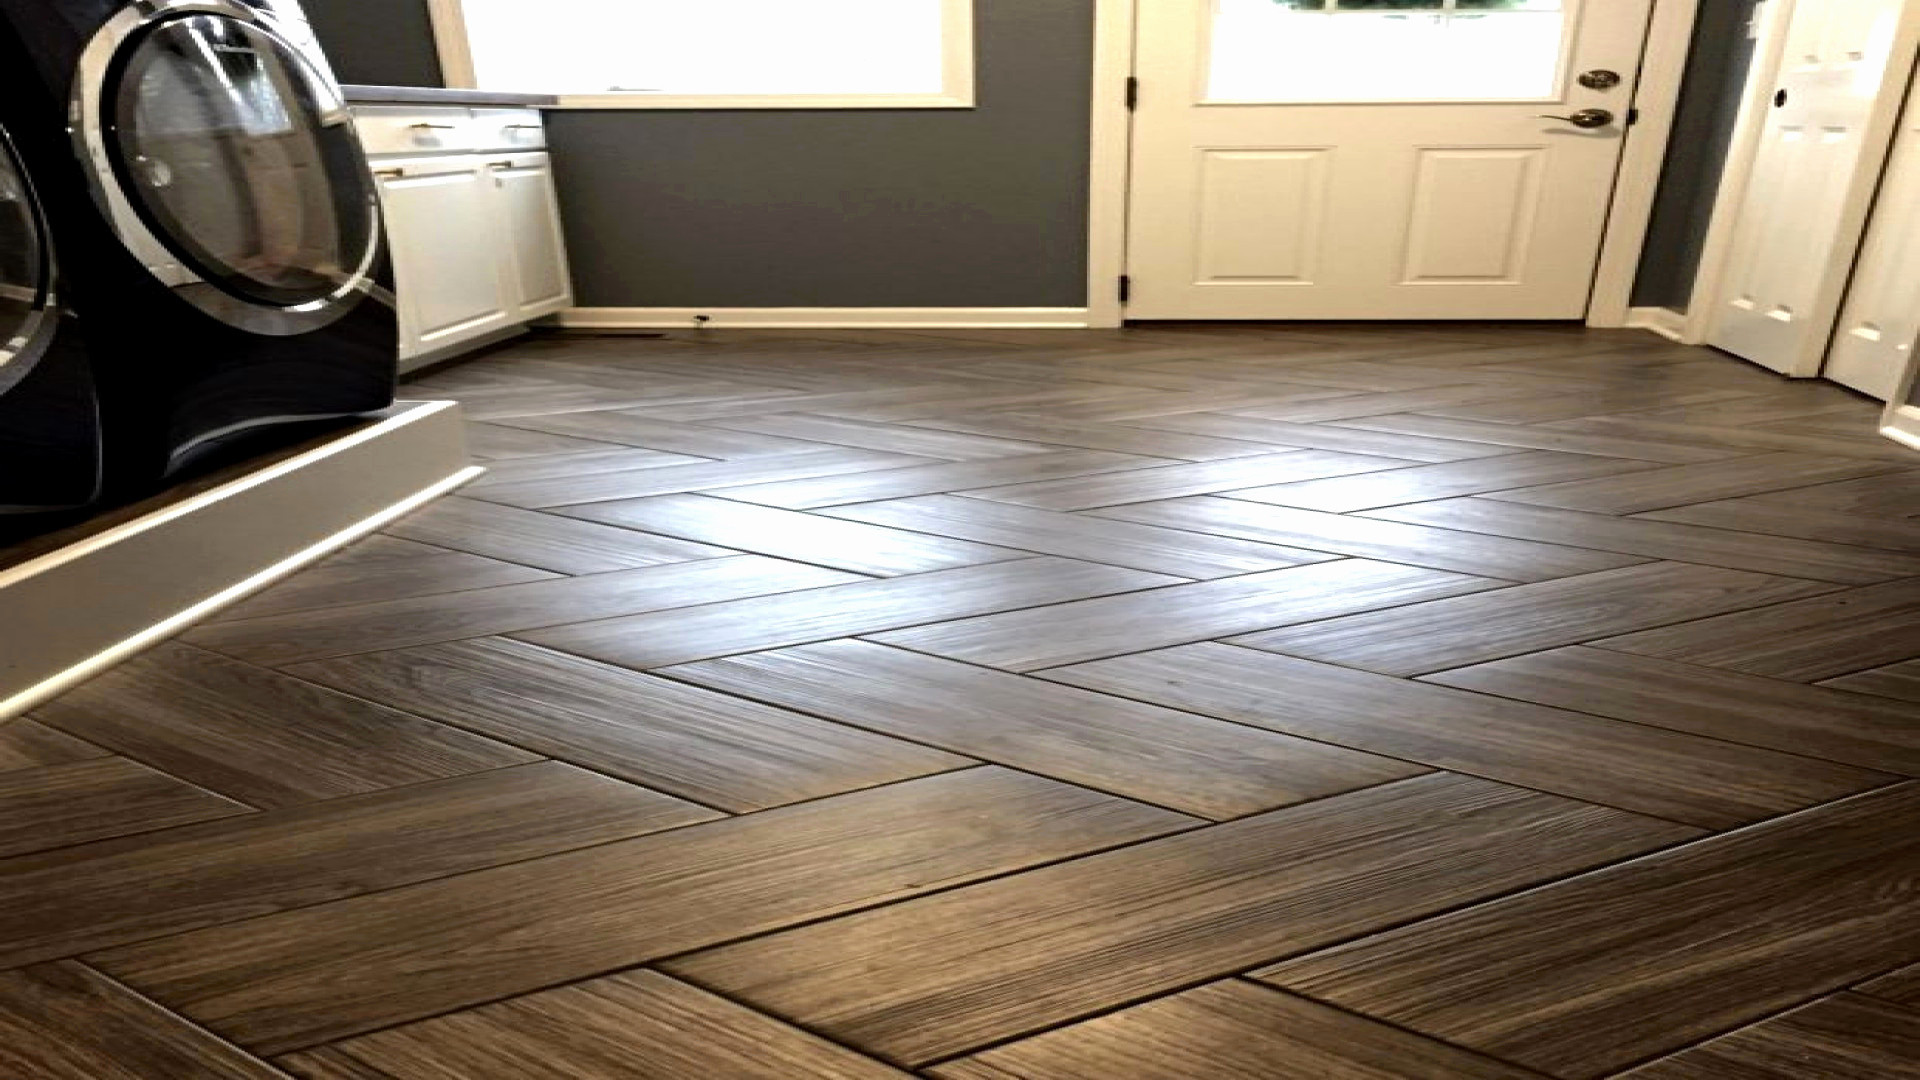 10 Fashionable Hardwood Floors Next to Tile 2022 free download hardwood floors next to tile of wood tile kitchen athomeforhire com intended for wood tile kitchen astonishing wood tile kitchen in addition to wood tile astonishing tile kitchen